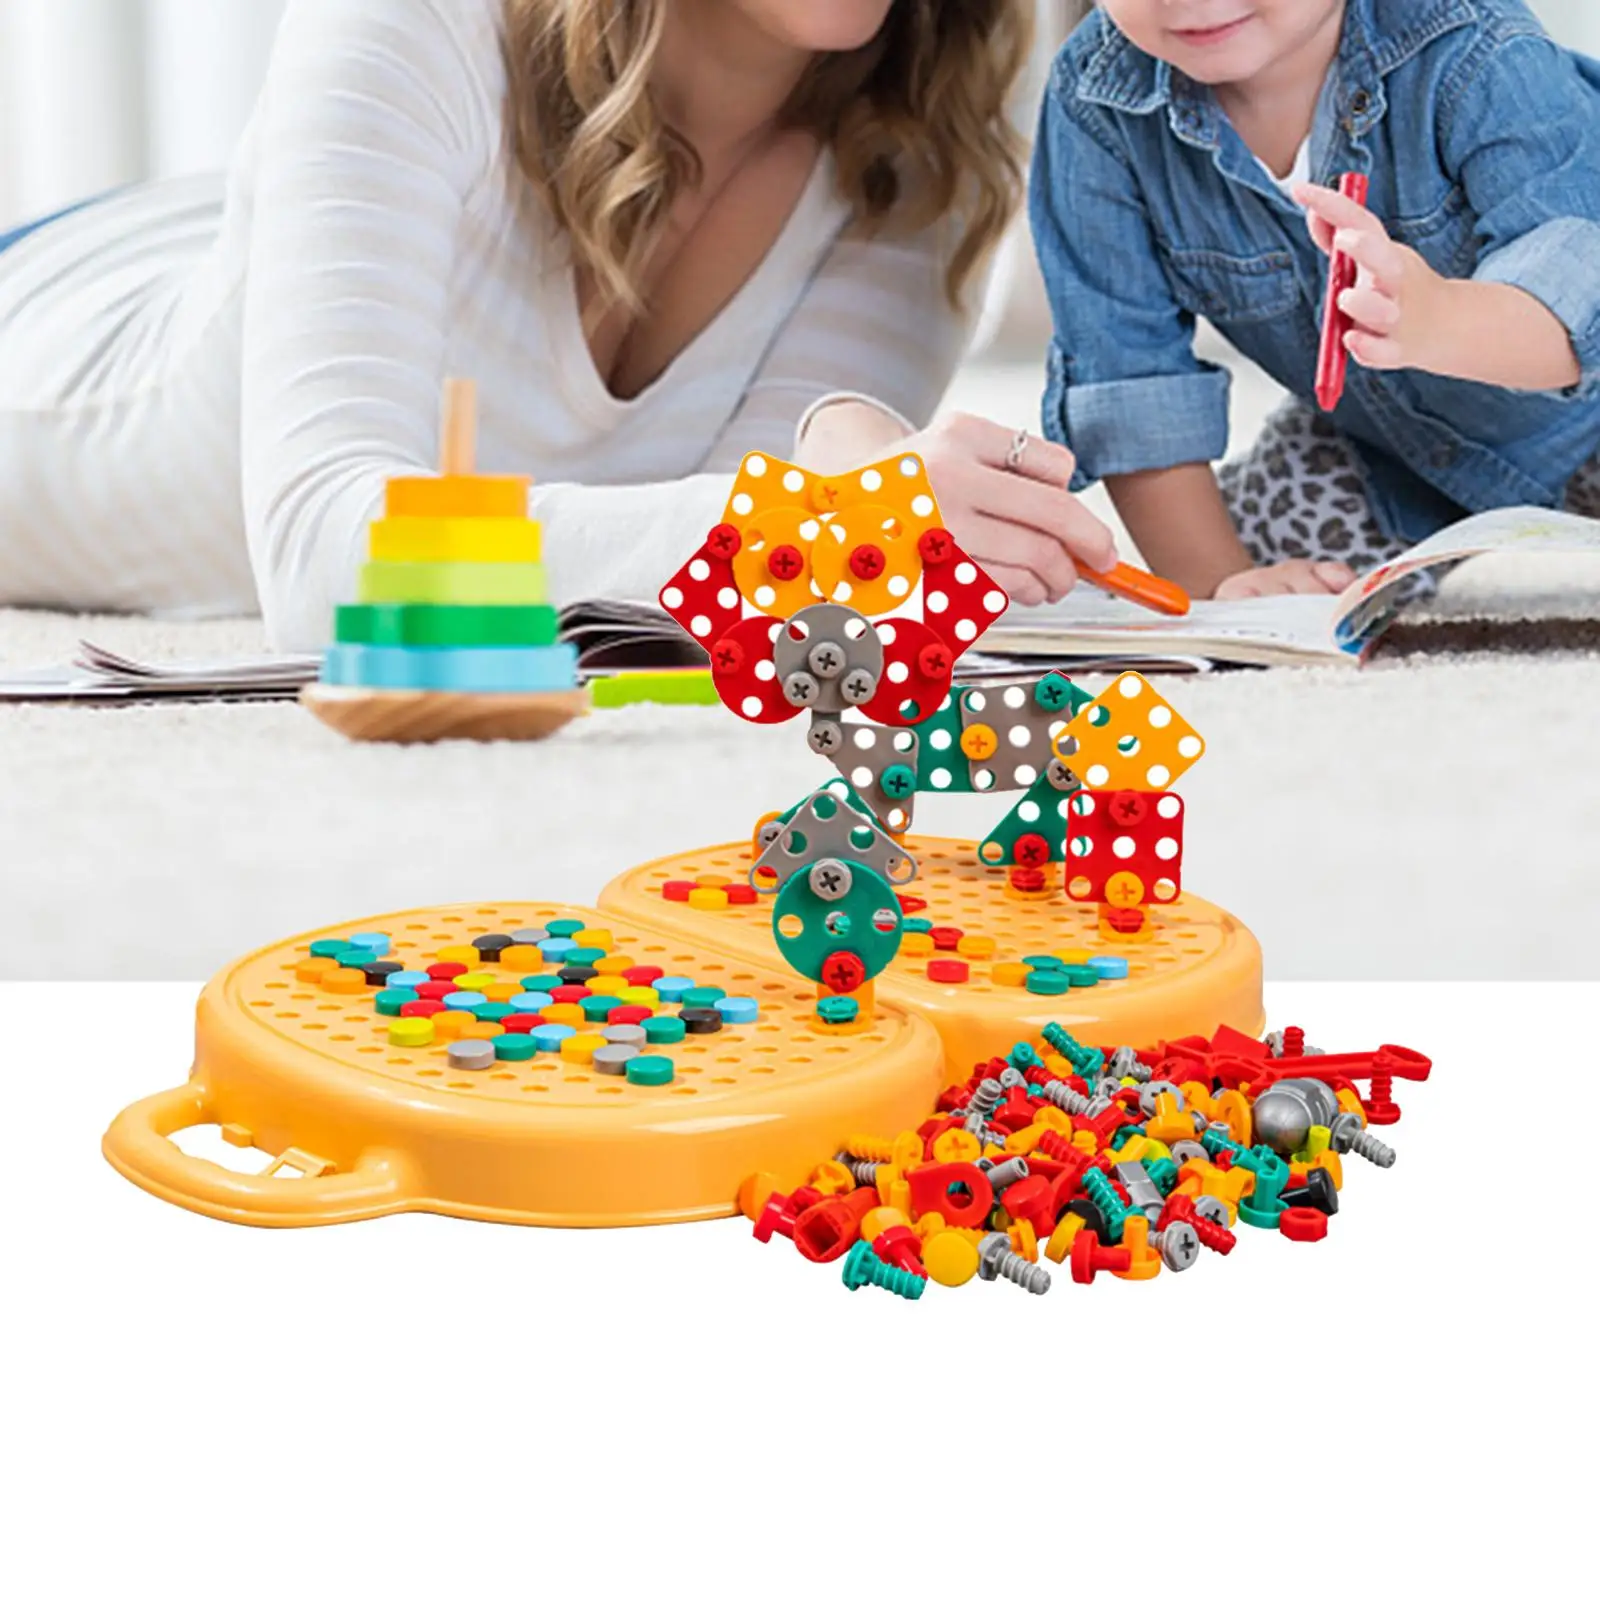 Building Toys Puzzle Toys Building Blocks Set Eduactional Toys Construction Engineering for Children Boys Girls Holiday Gifts